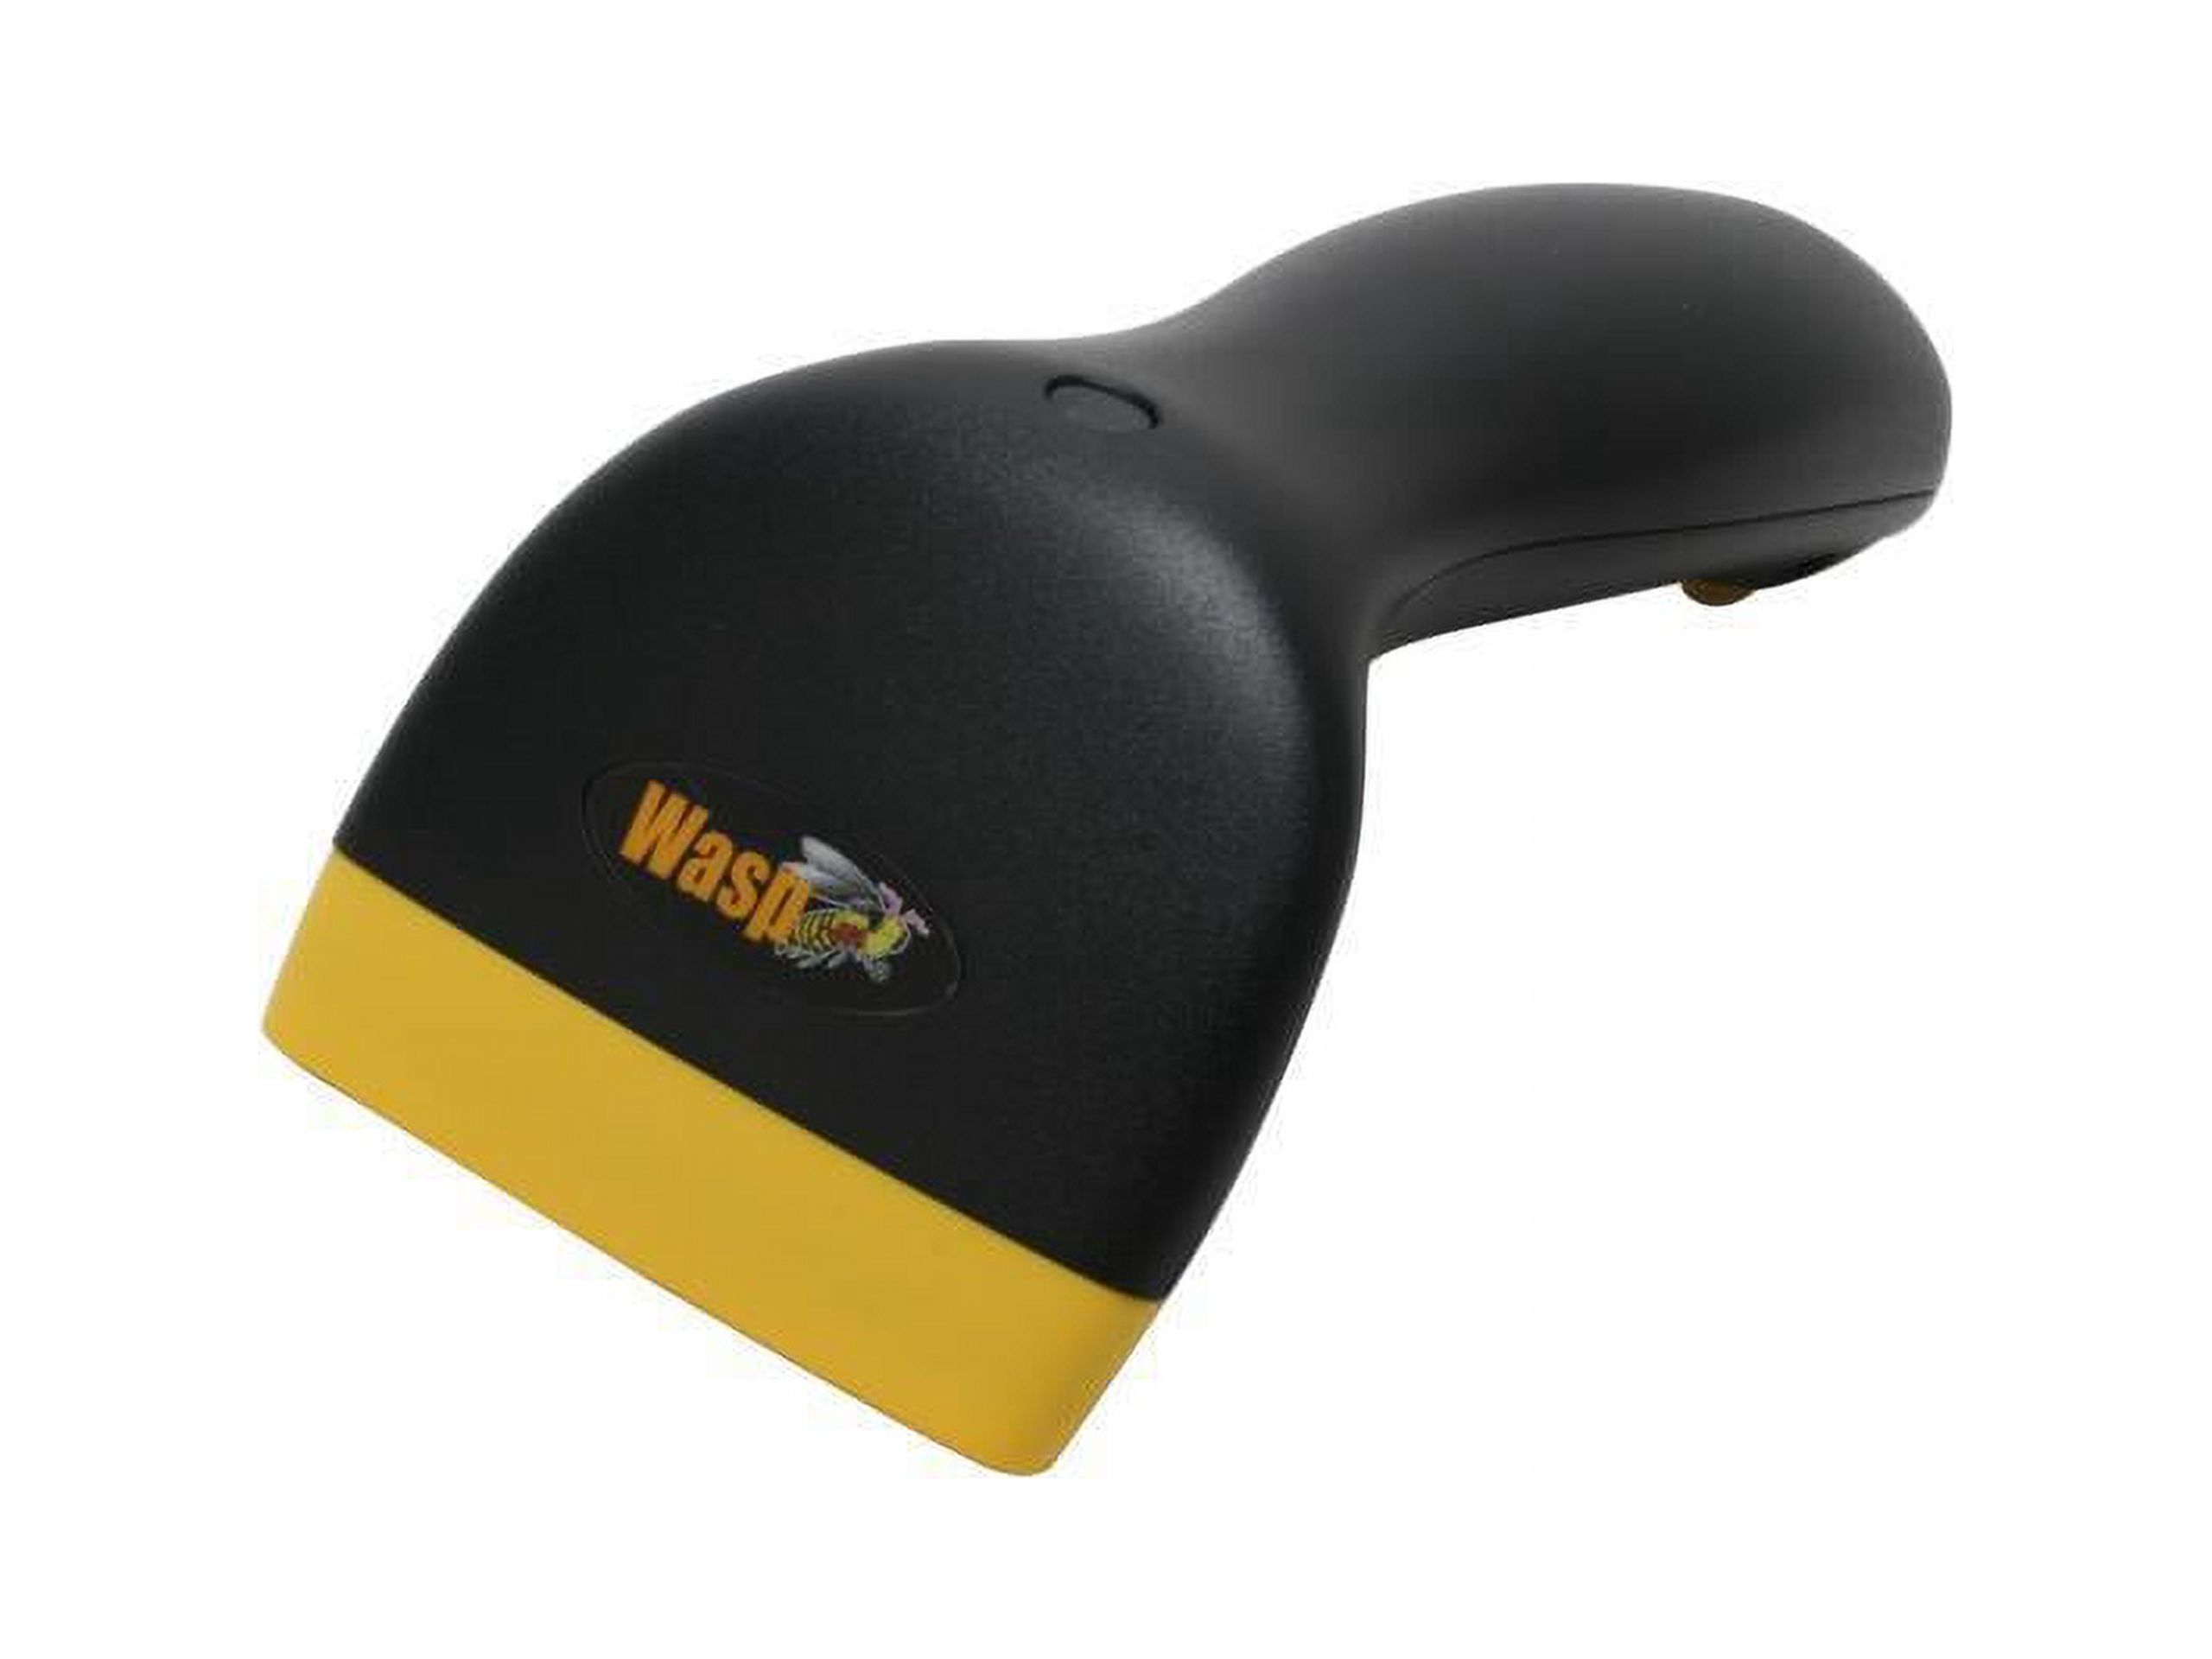 Wasp 633808091040 WCS3900 Series CCD Barcode Scanner With USB Cable - image 2 of 6